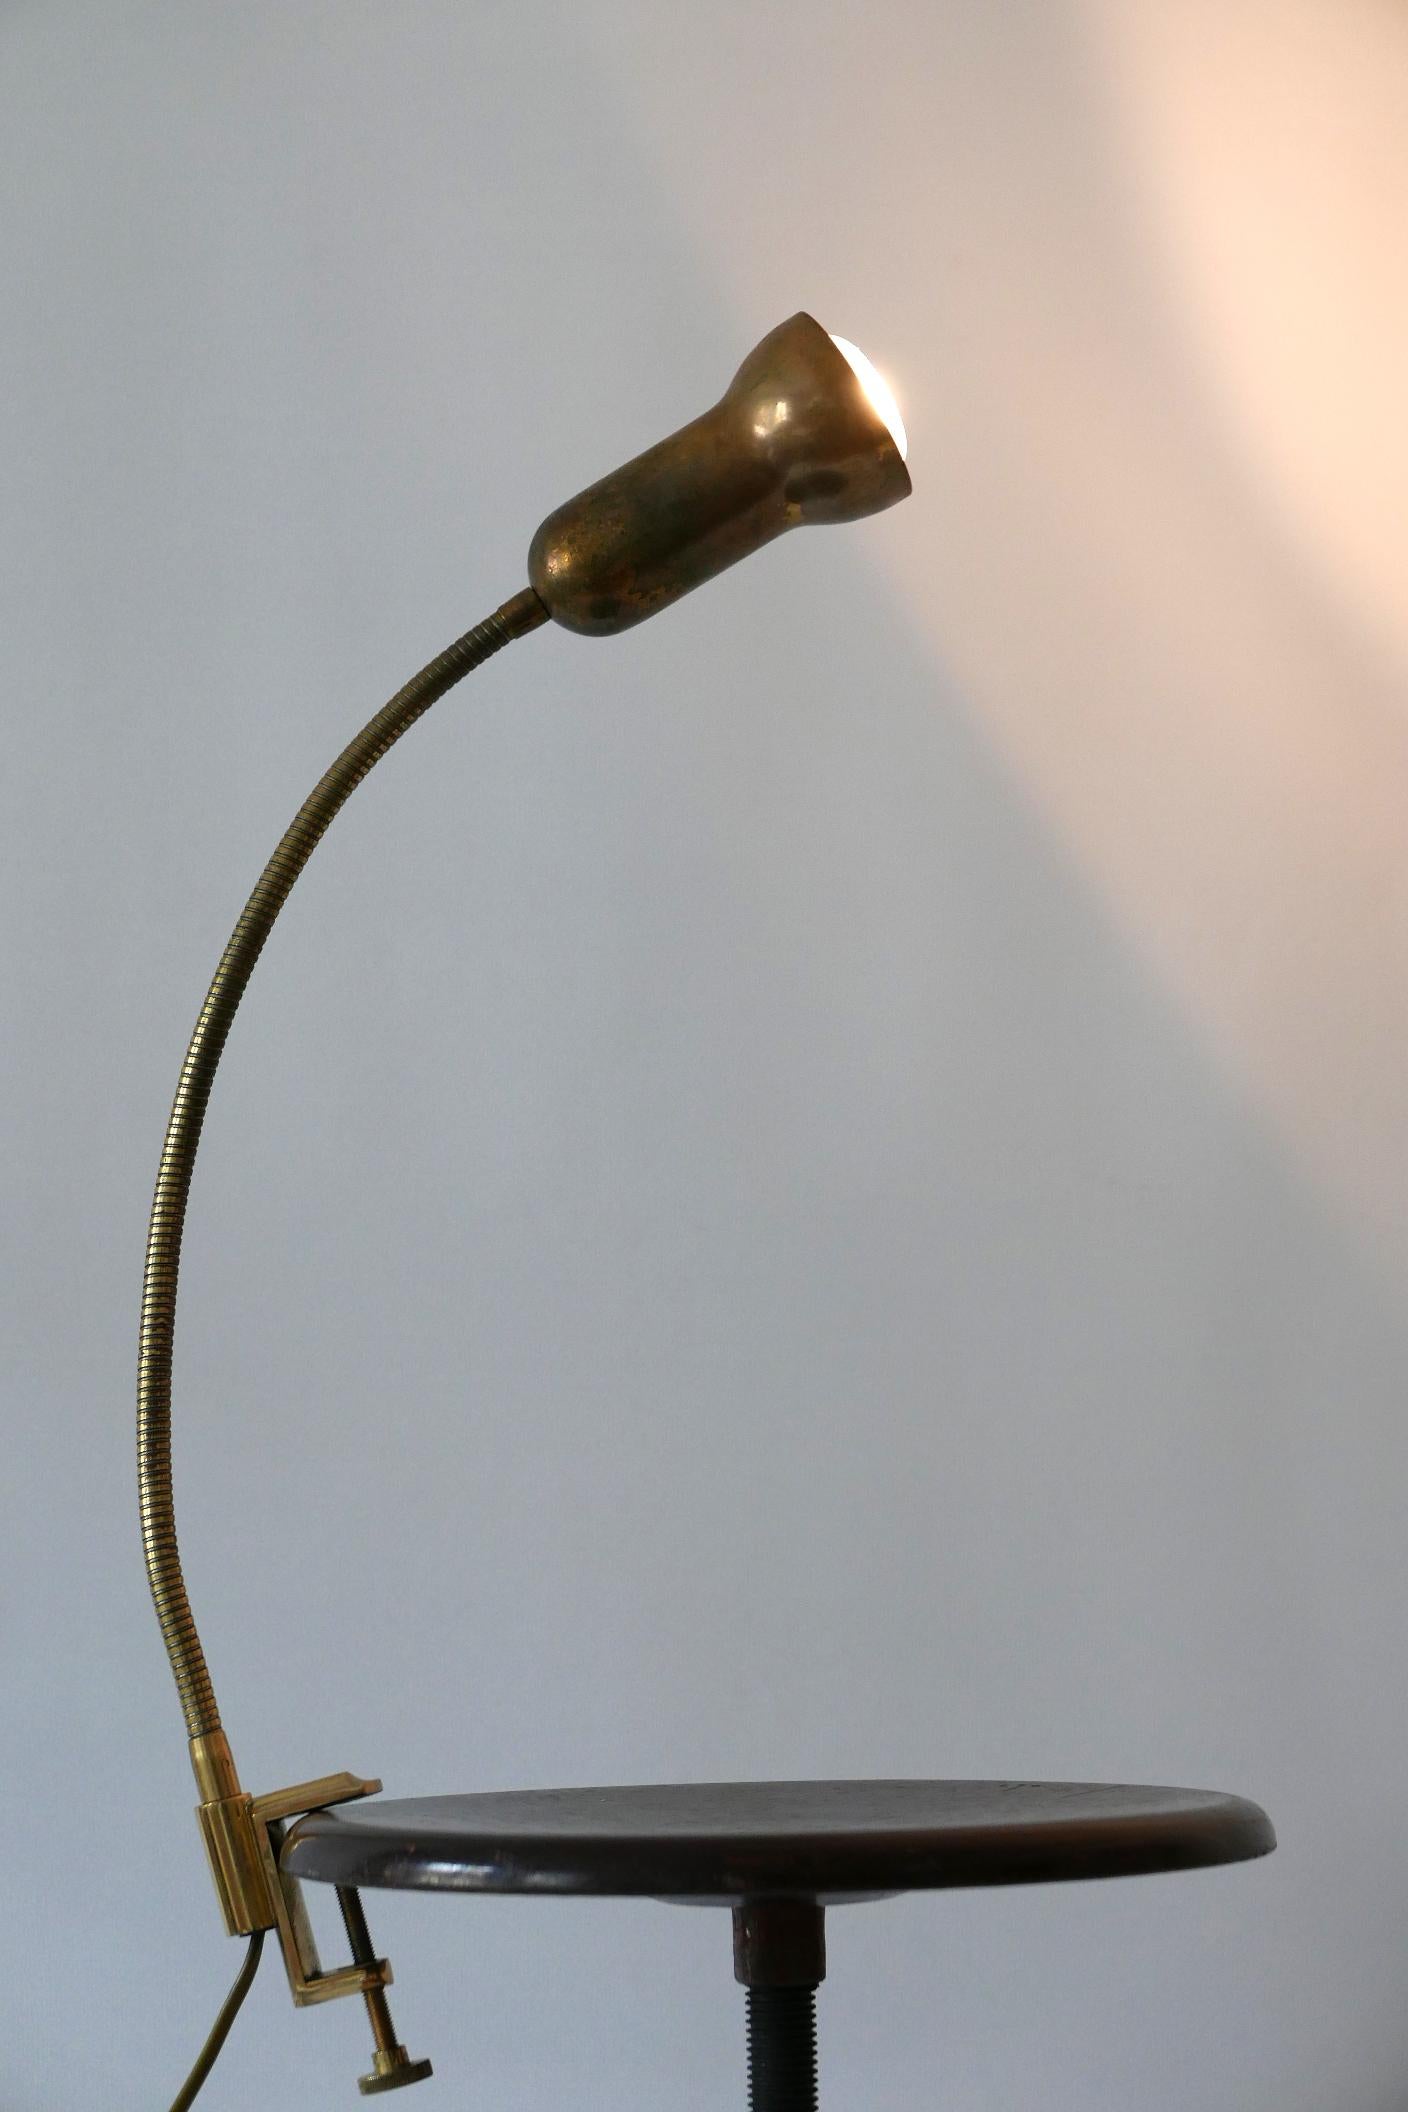 Lovely Mid-Century Modern brass clamp table lamp. Manufactured by Gebrüder Cosack, 1970s, Germany.

Due to the goose neck, the lamp is adjustable in various positions.

Executed in brass, the lamp needs 1 x E27 / E26 Edison screw fit bulb, is wired